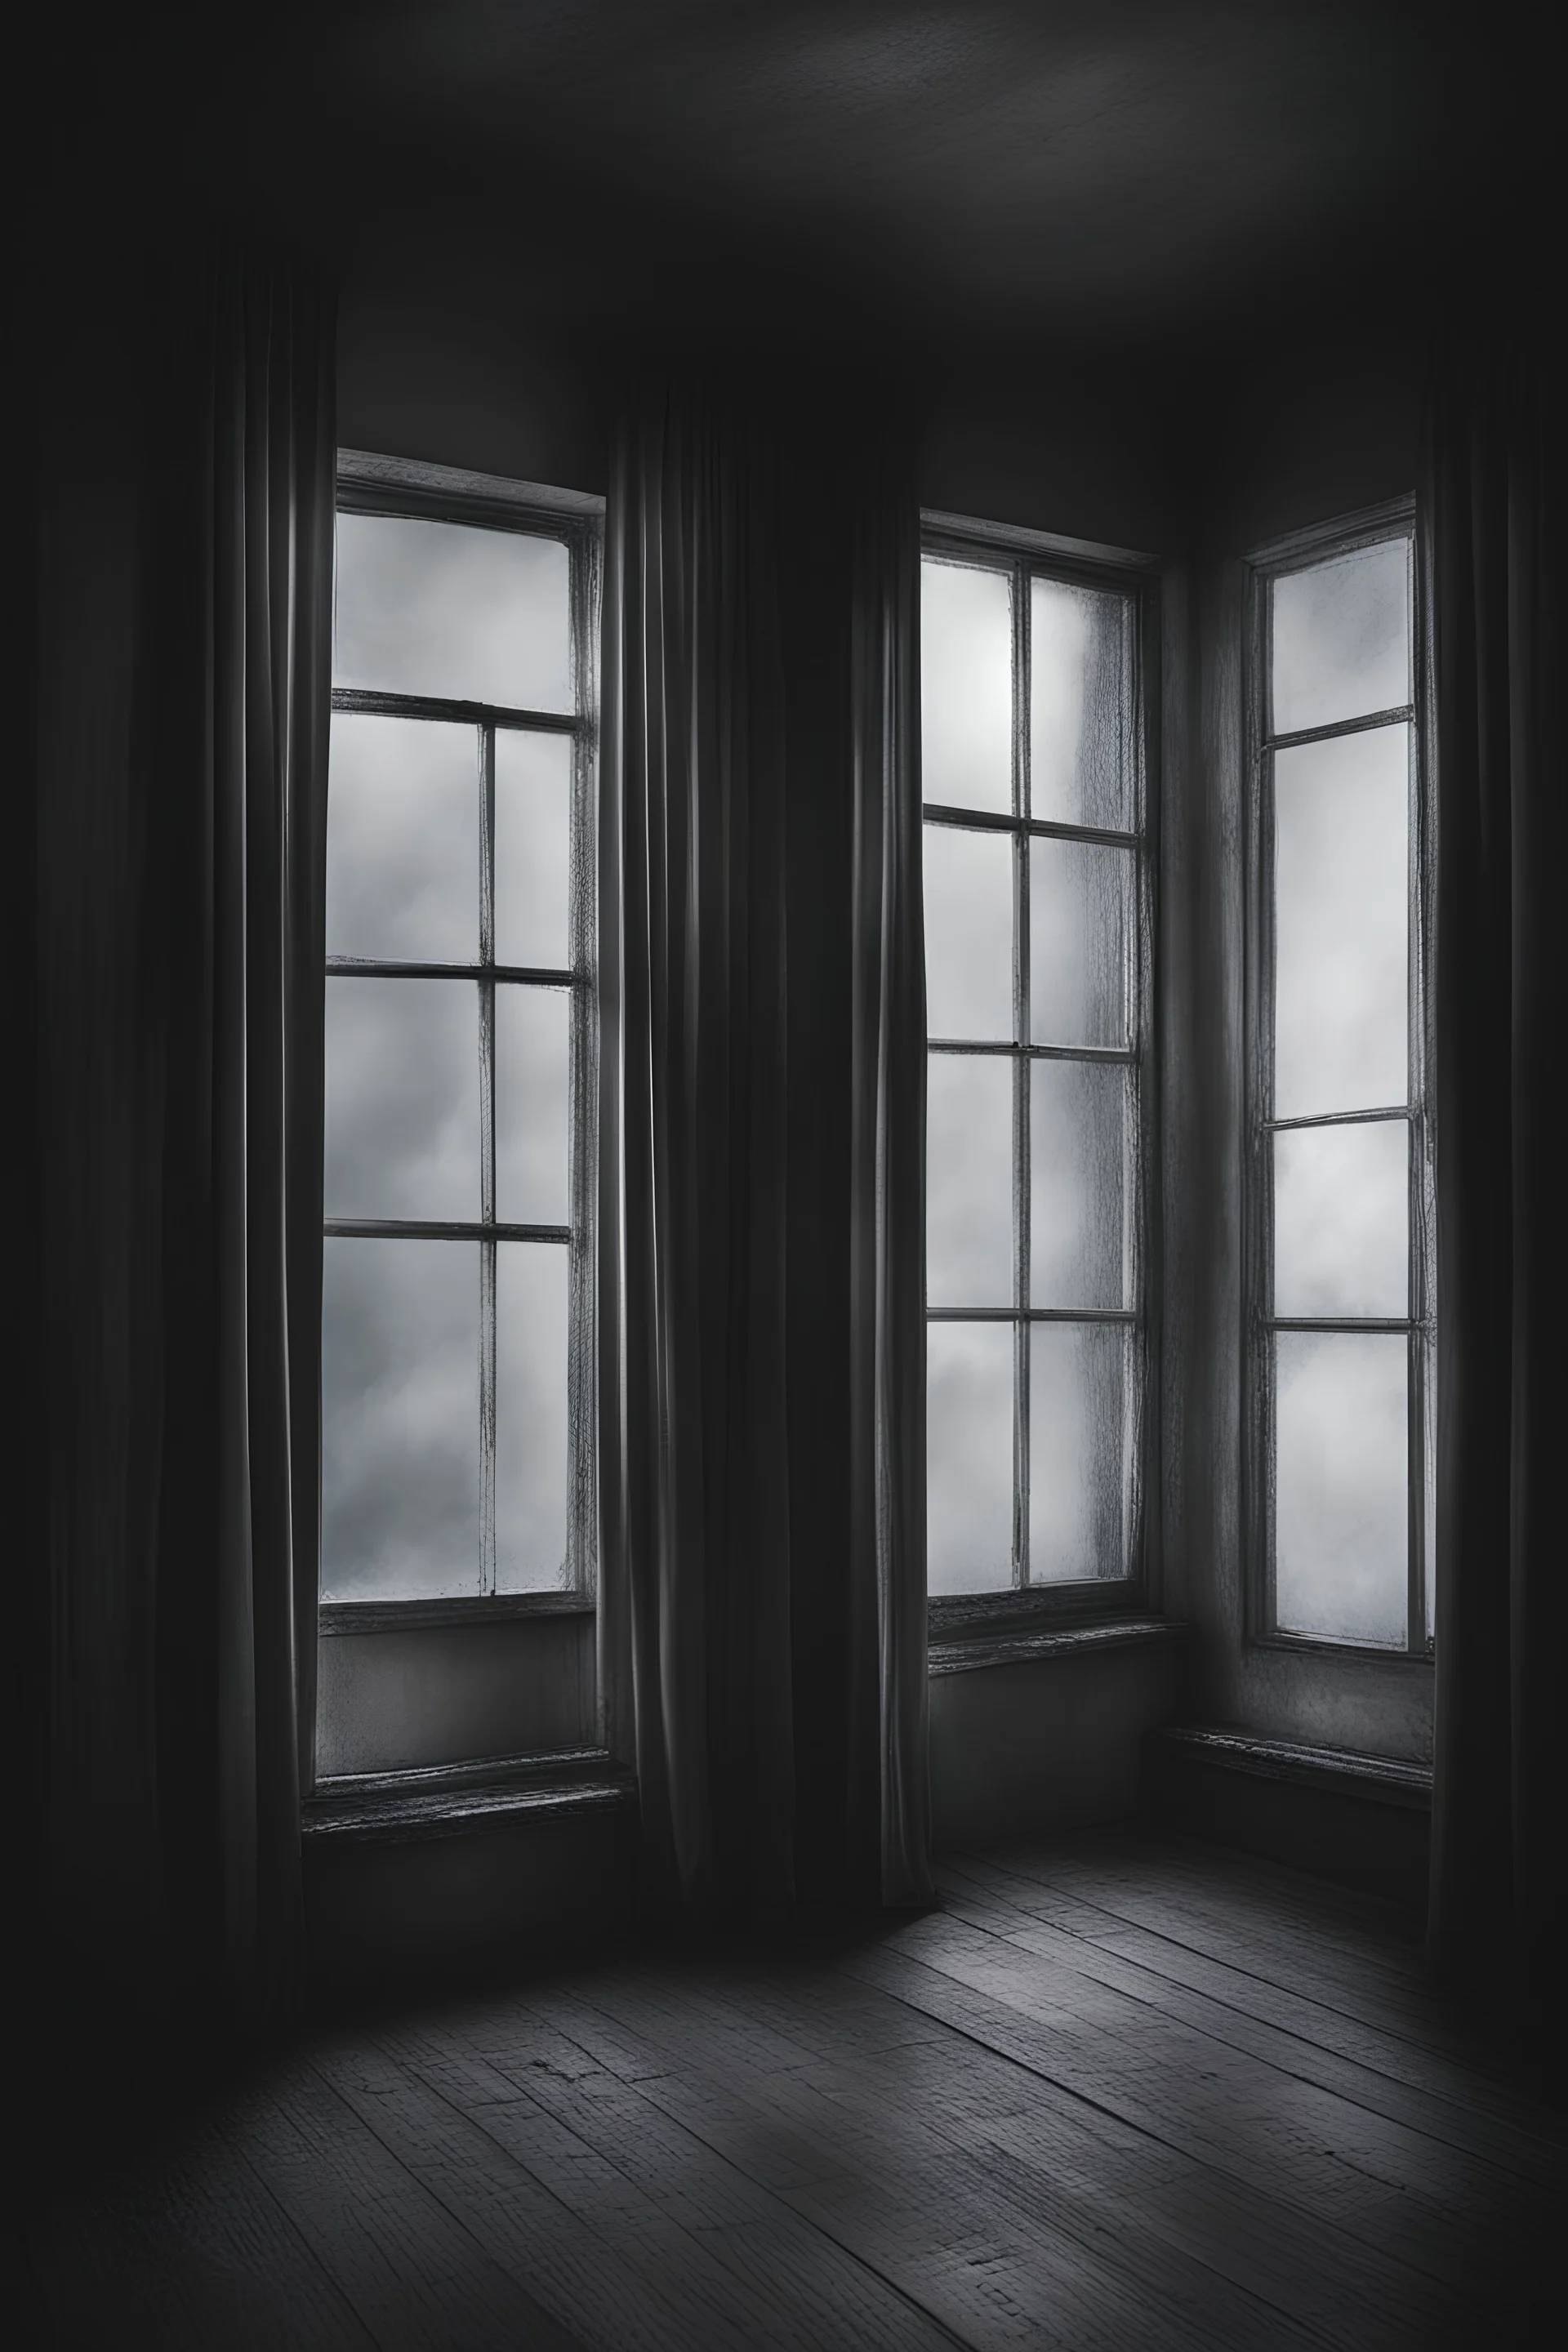 darkness creeps into the room through the open window